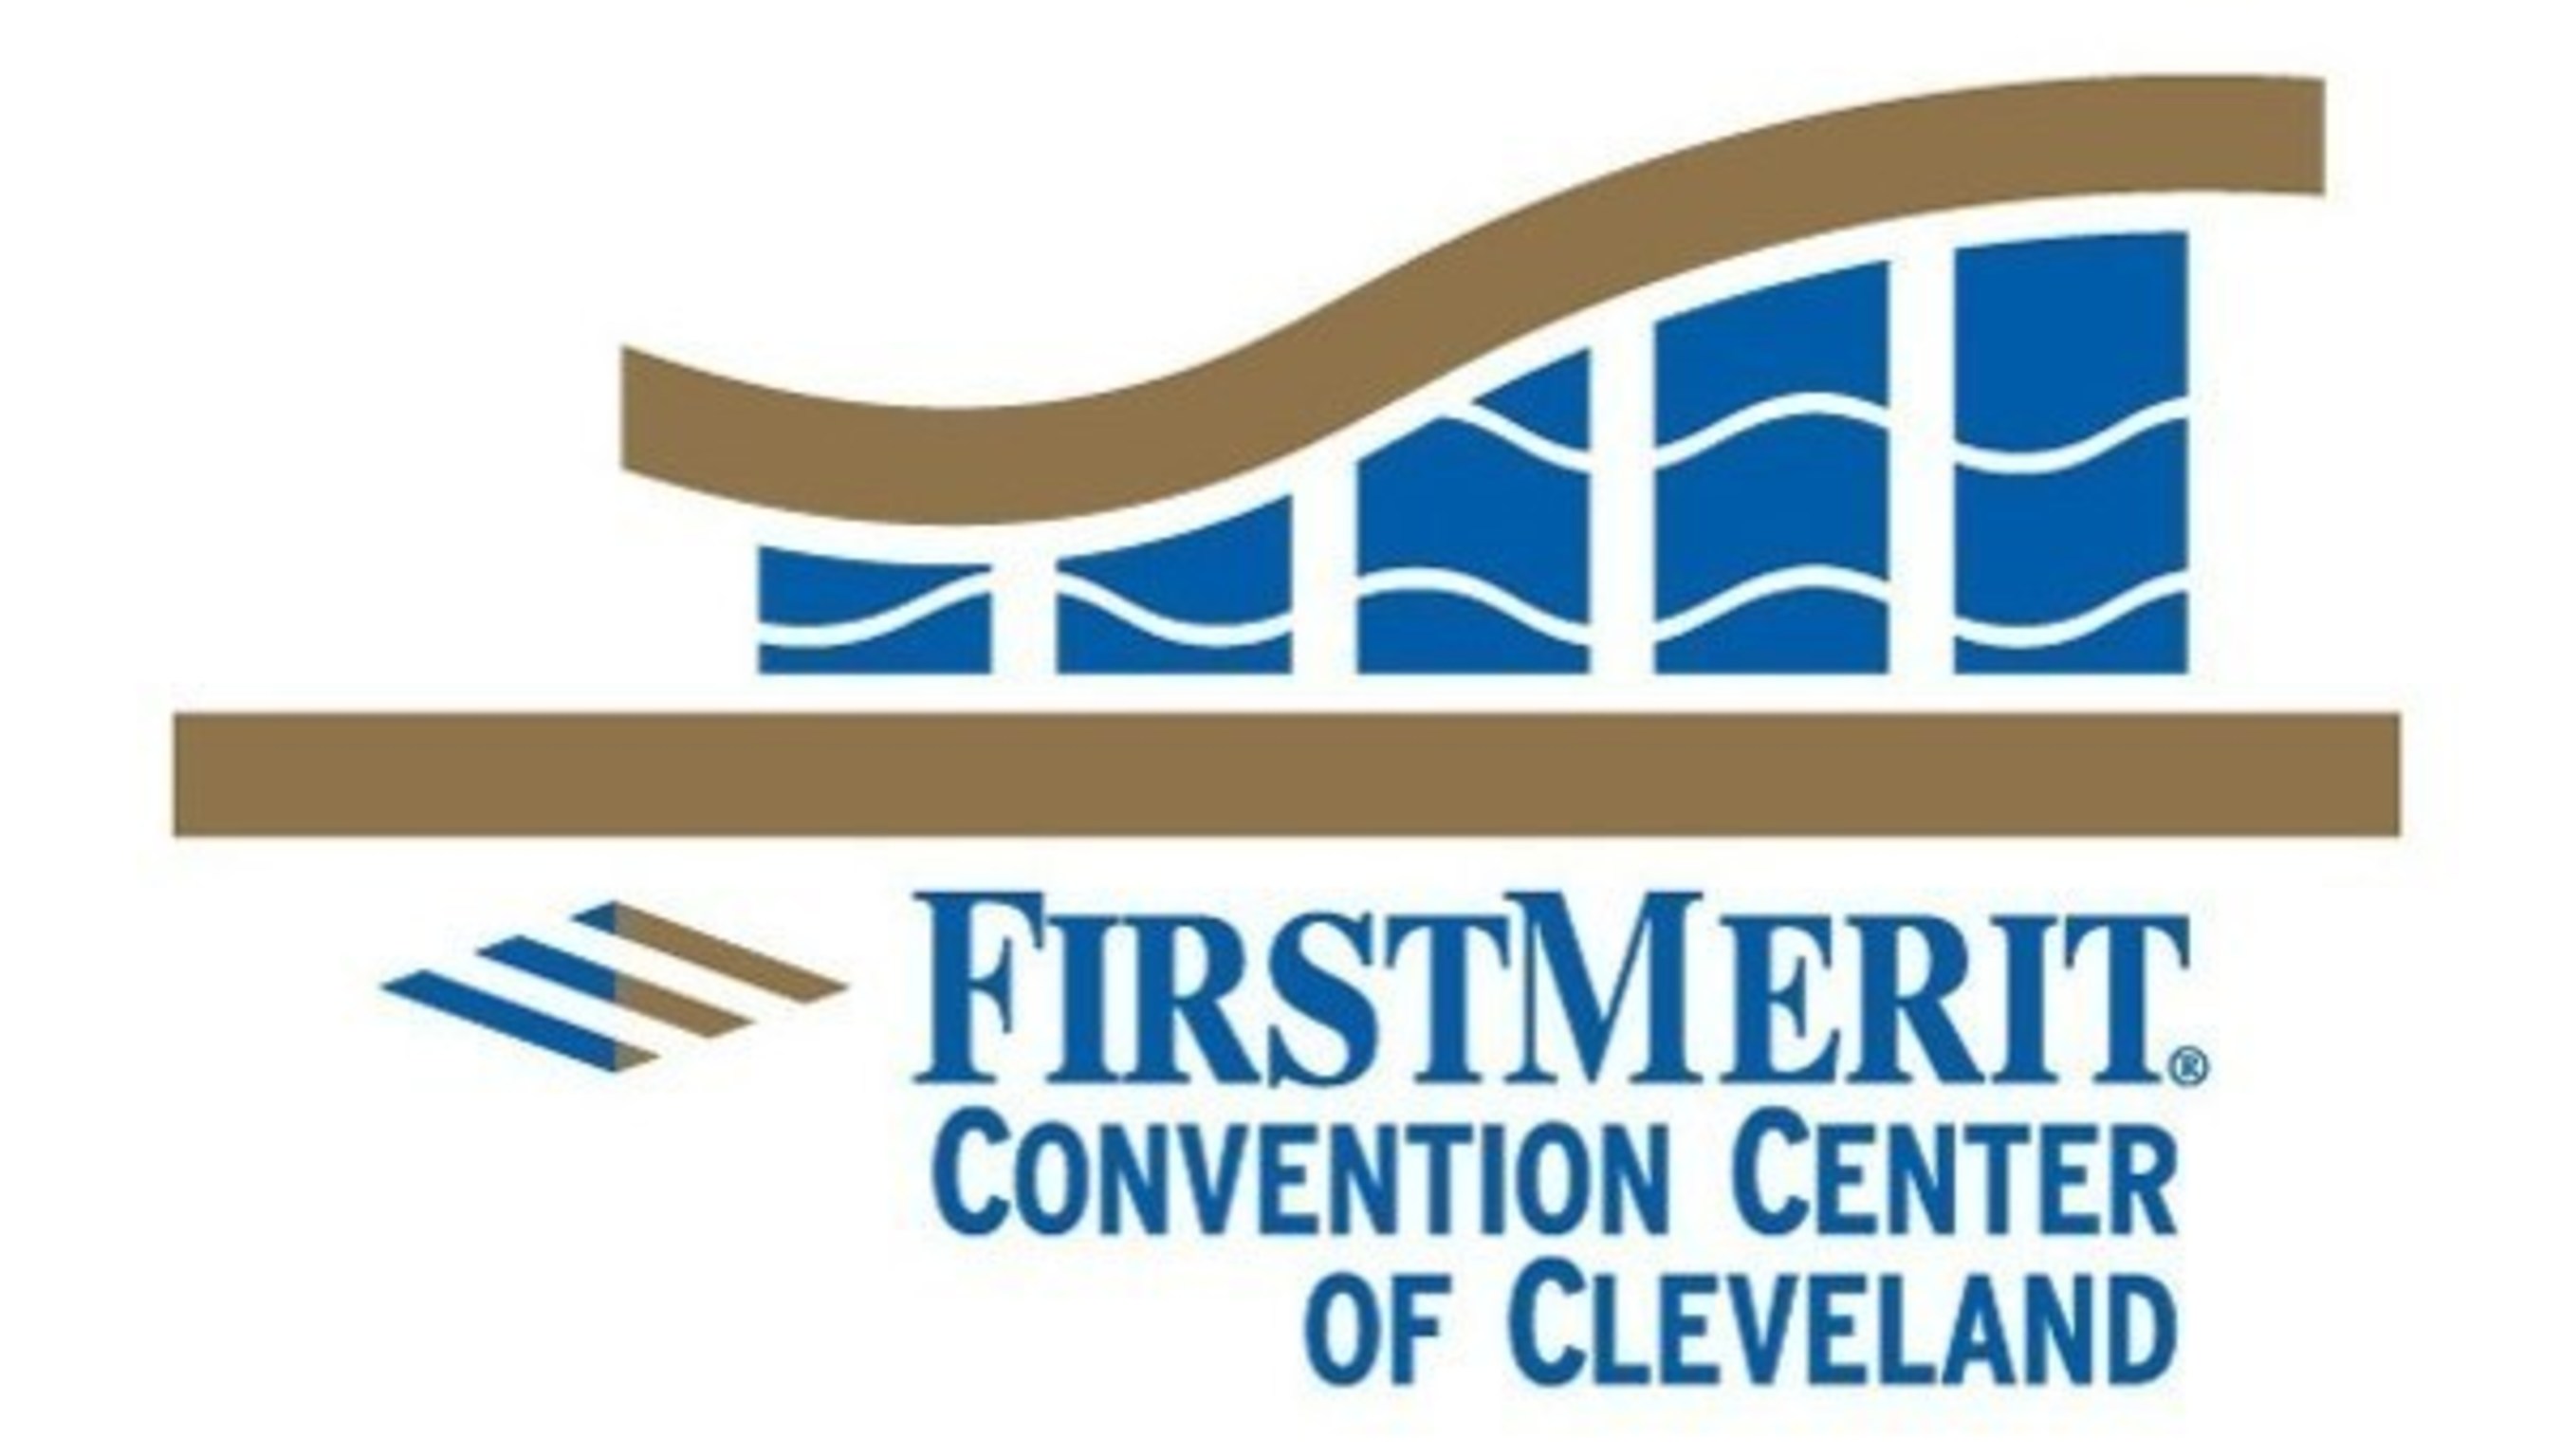 FirstMerit Convention Center of Cleveland logo